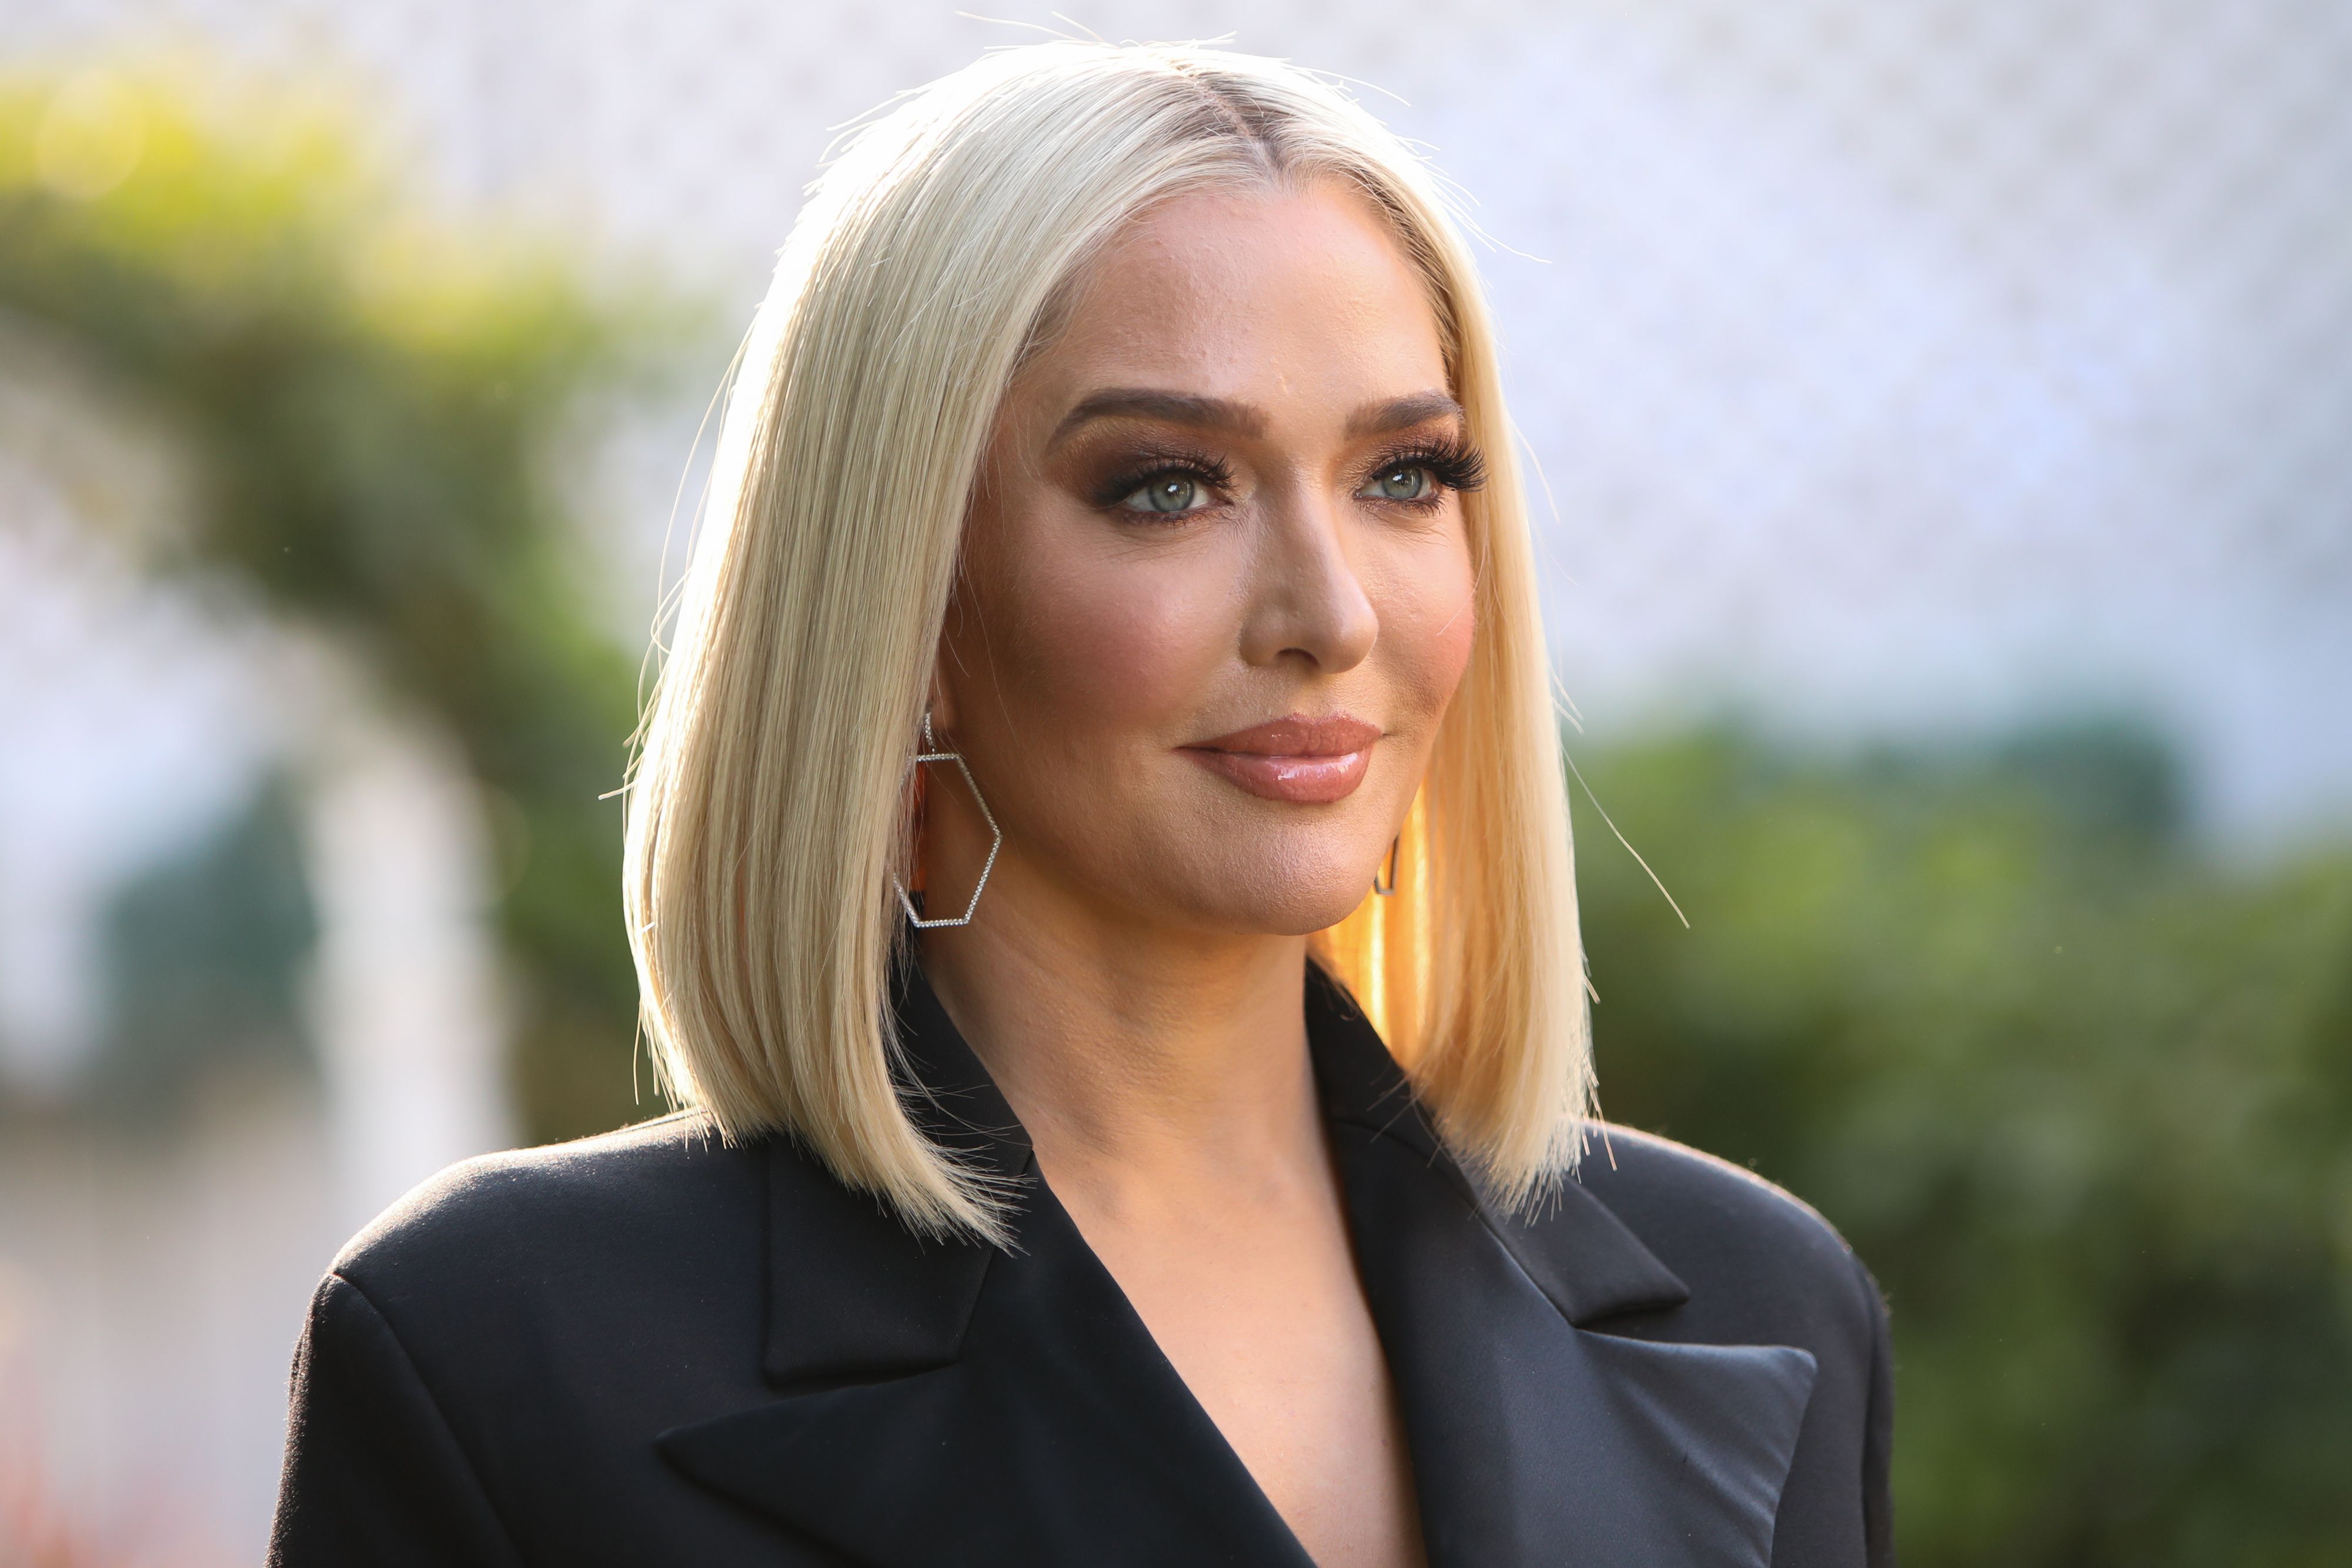 Erika Jayne visits Hallmark Channel's "Home & Family" at Universal Studios Hollywood on November 11, 2019 | Photo: Getty Images